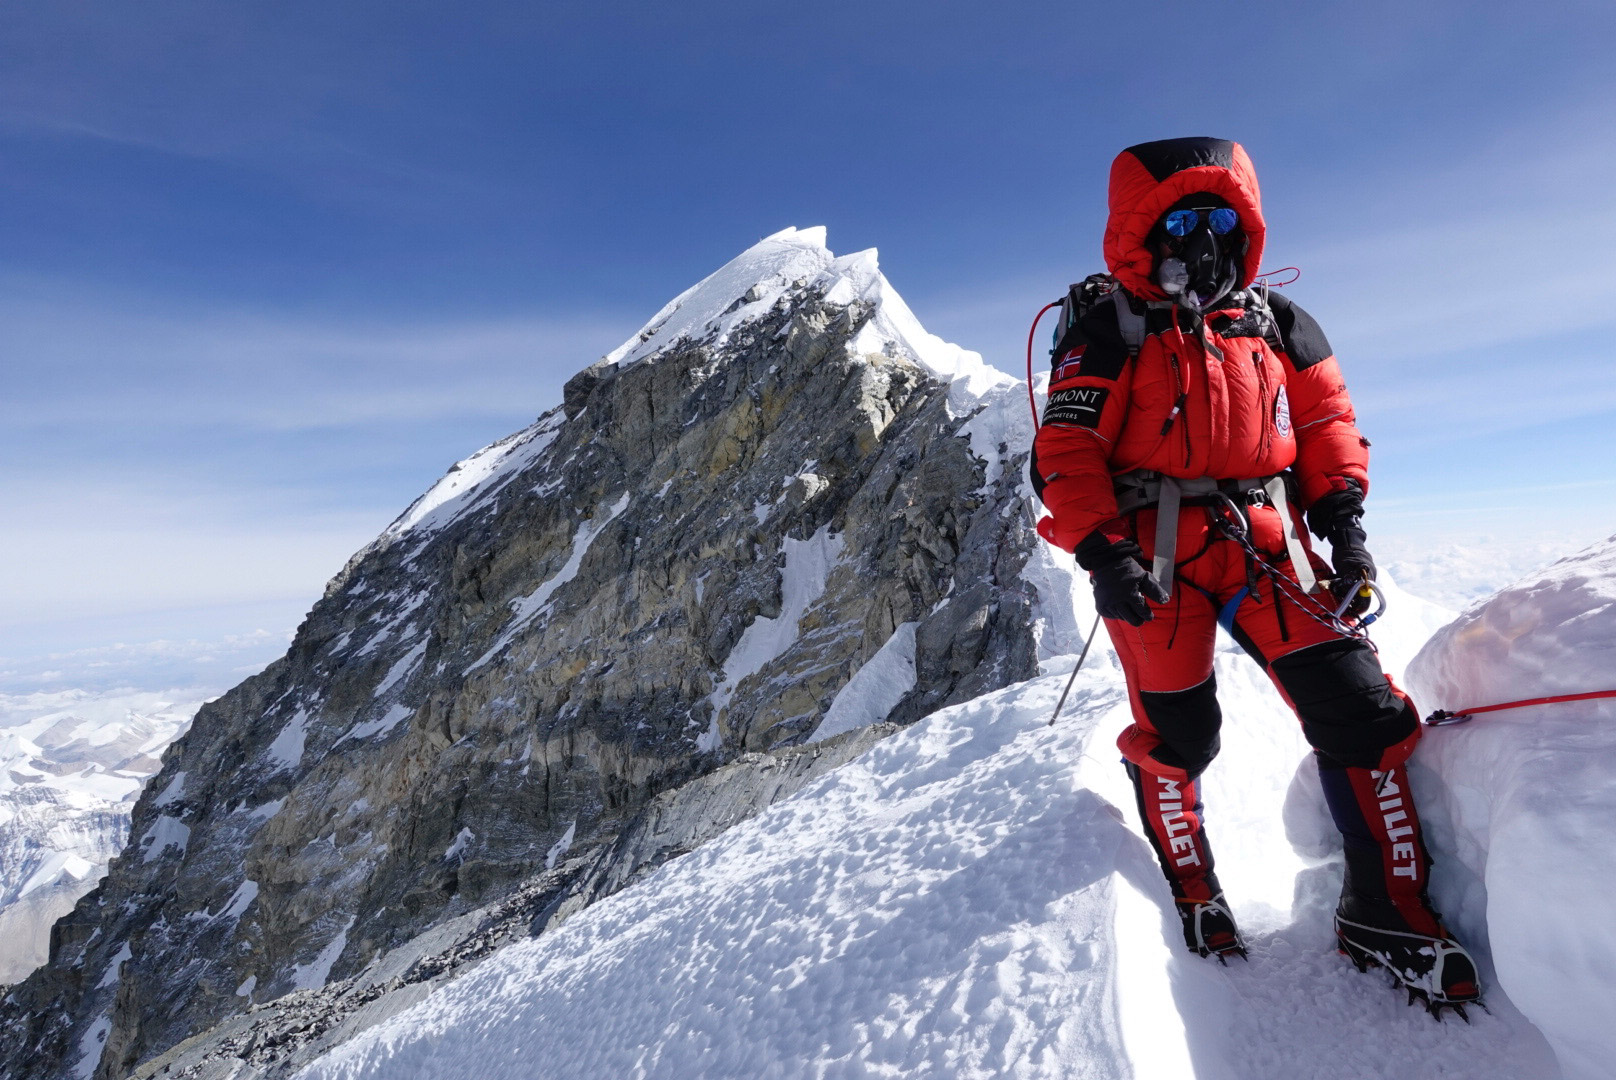 Mountaineer Kristin Harila Gives the ‘14 Peaks’ Speed Record Another Go 